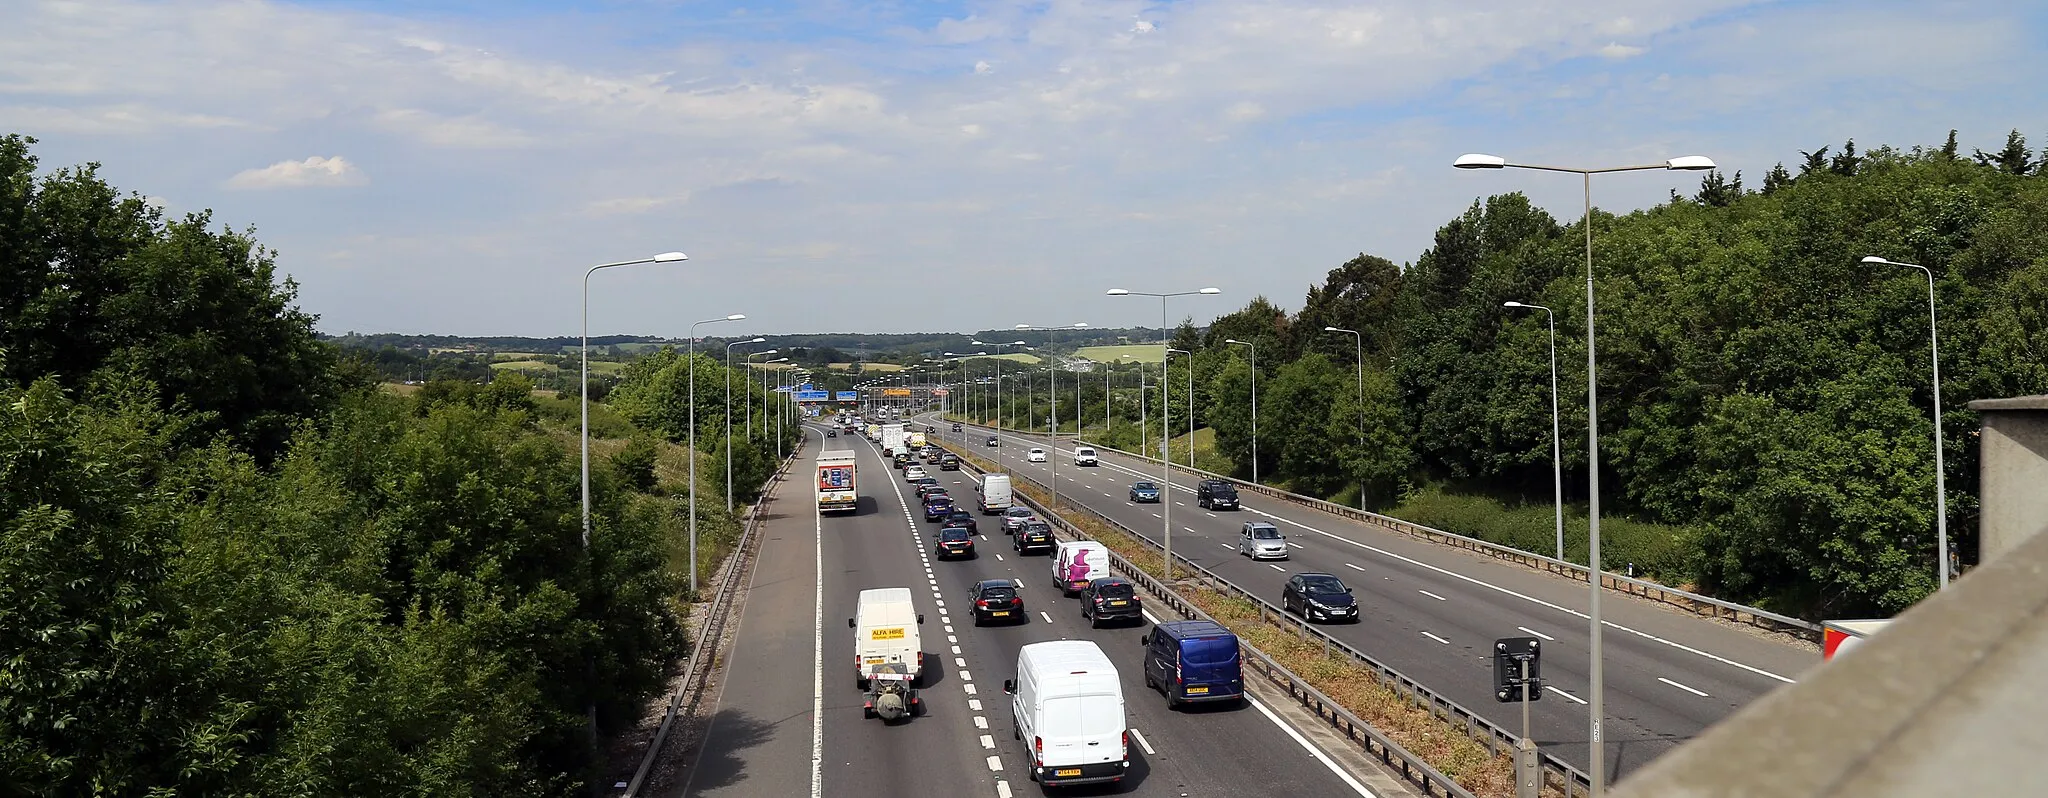 Photo showing: The M11 motorway looking north from a bridge on Coopersale Lane towards the M11 Junction 6 and M25 Junction 27 interchange, in the civil parish of Theydon Garnon, Essex, England